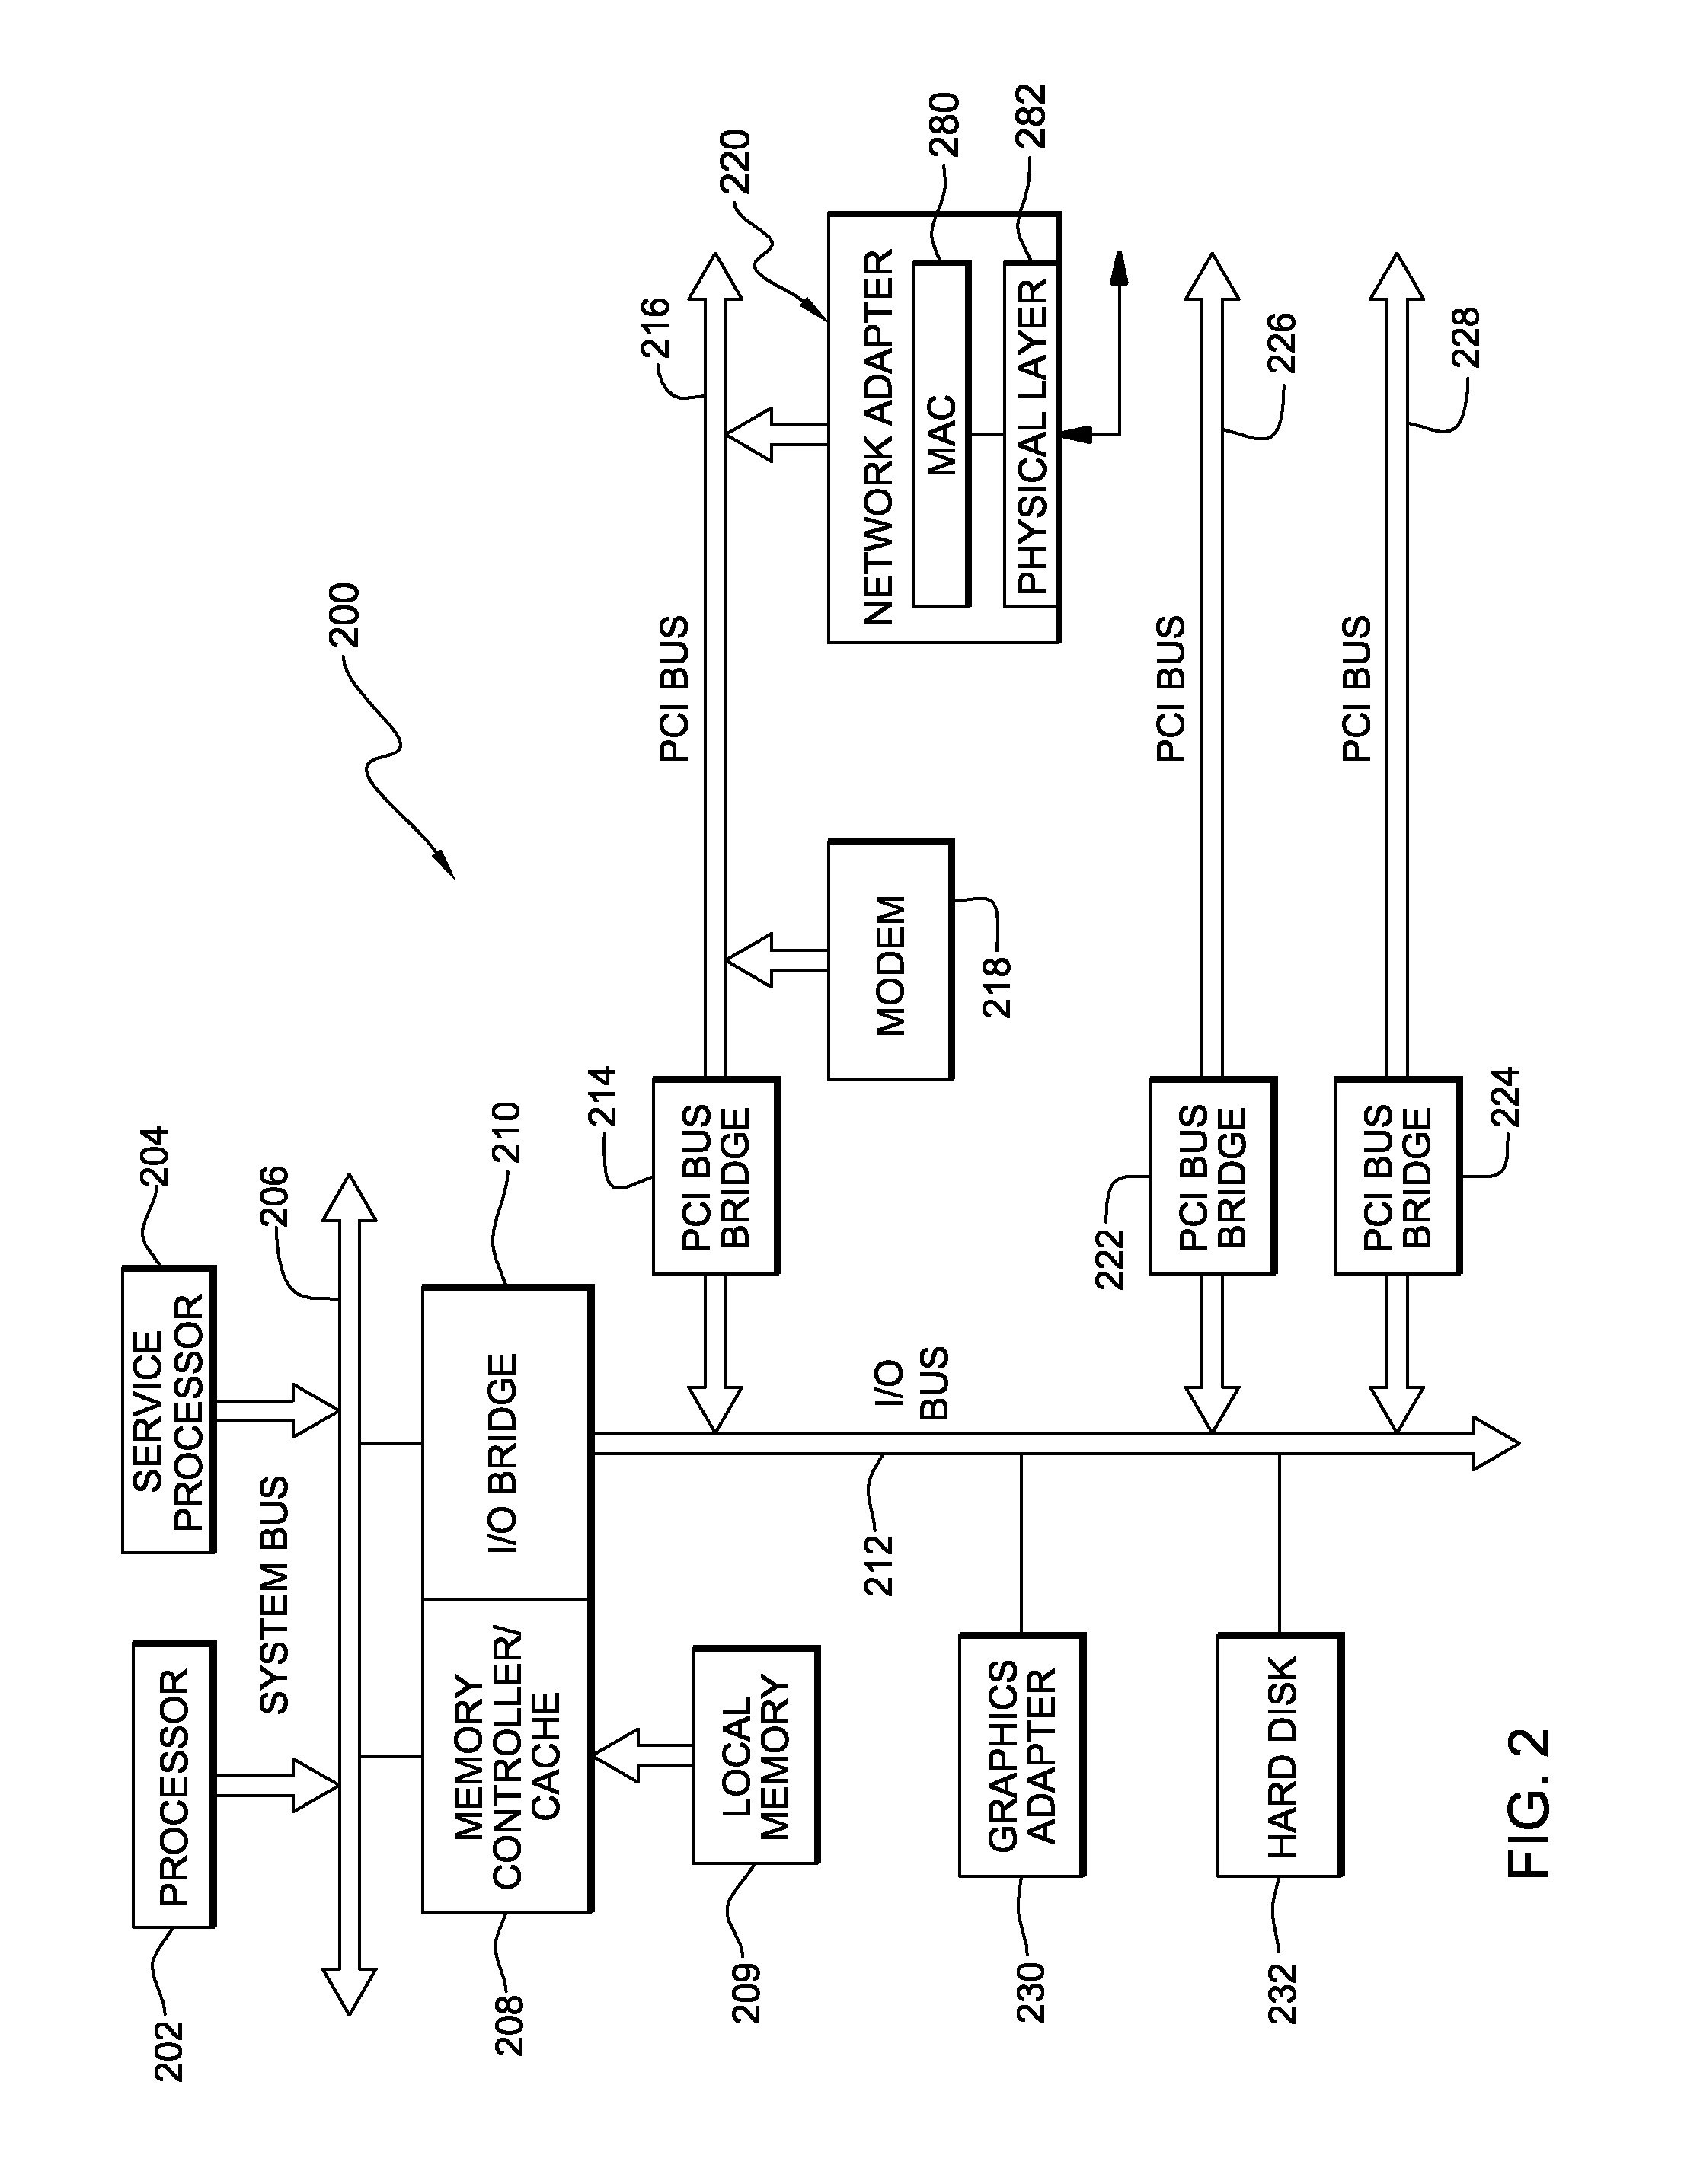 Partition adjunct for data processing system